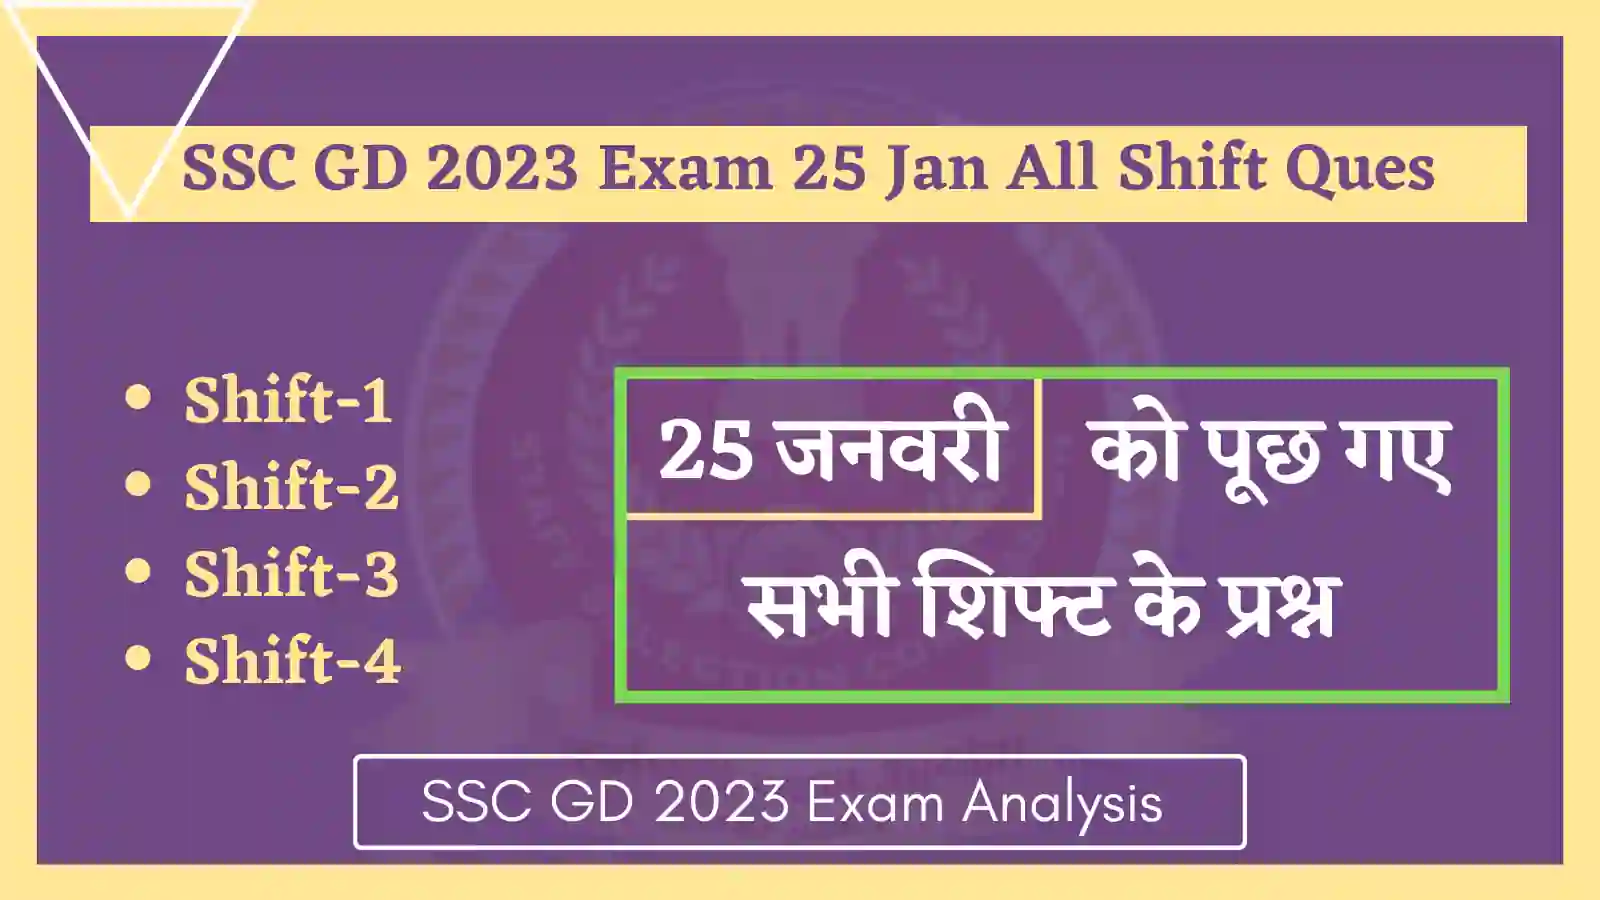 SSC GD 2023 Exam 25 January All Shift Questions